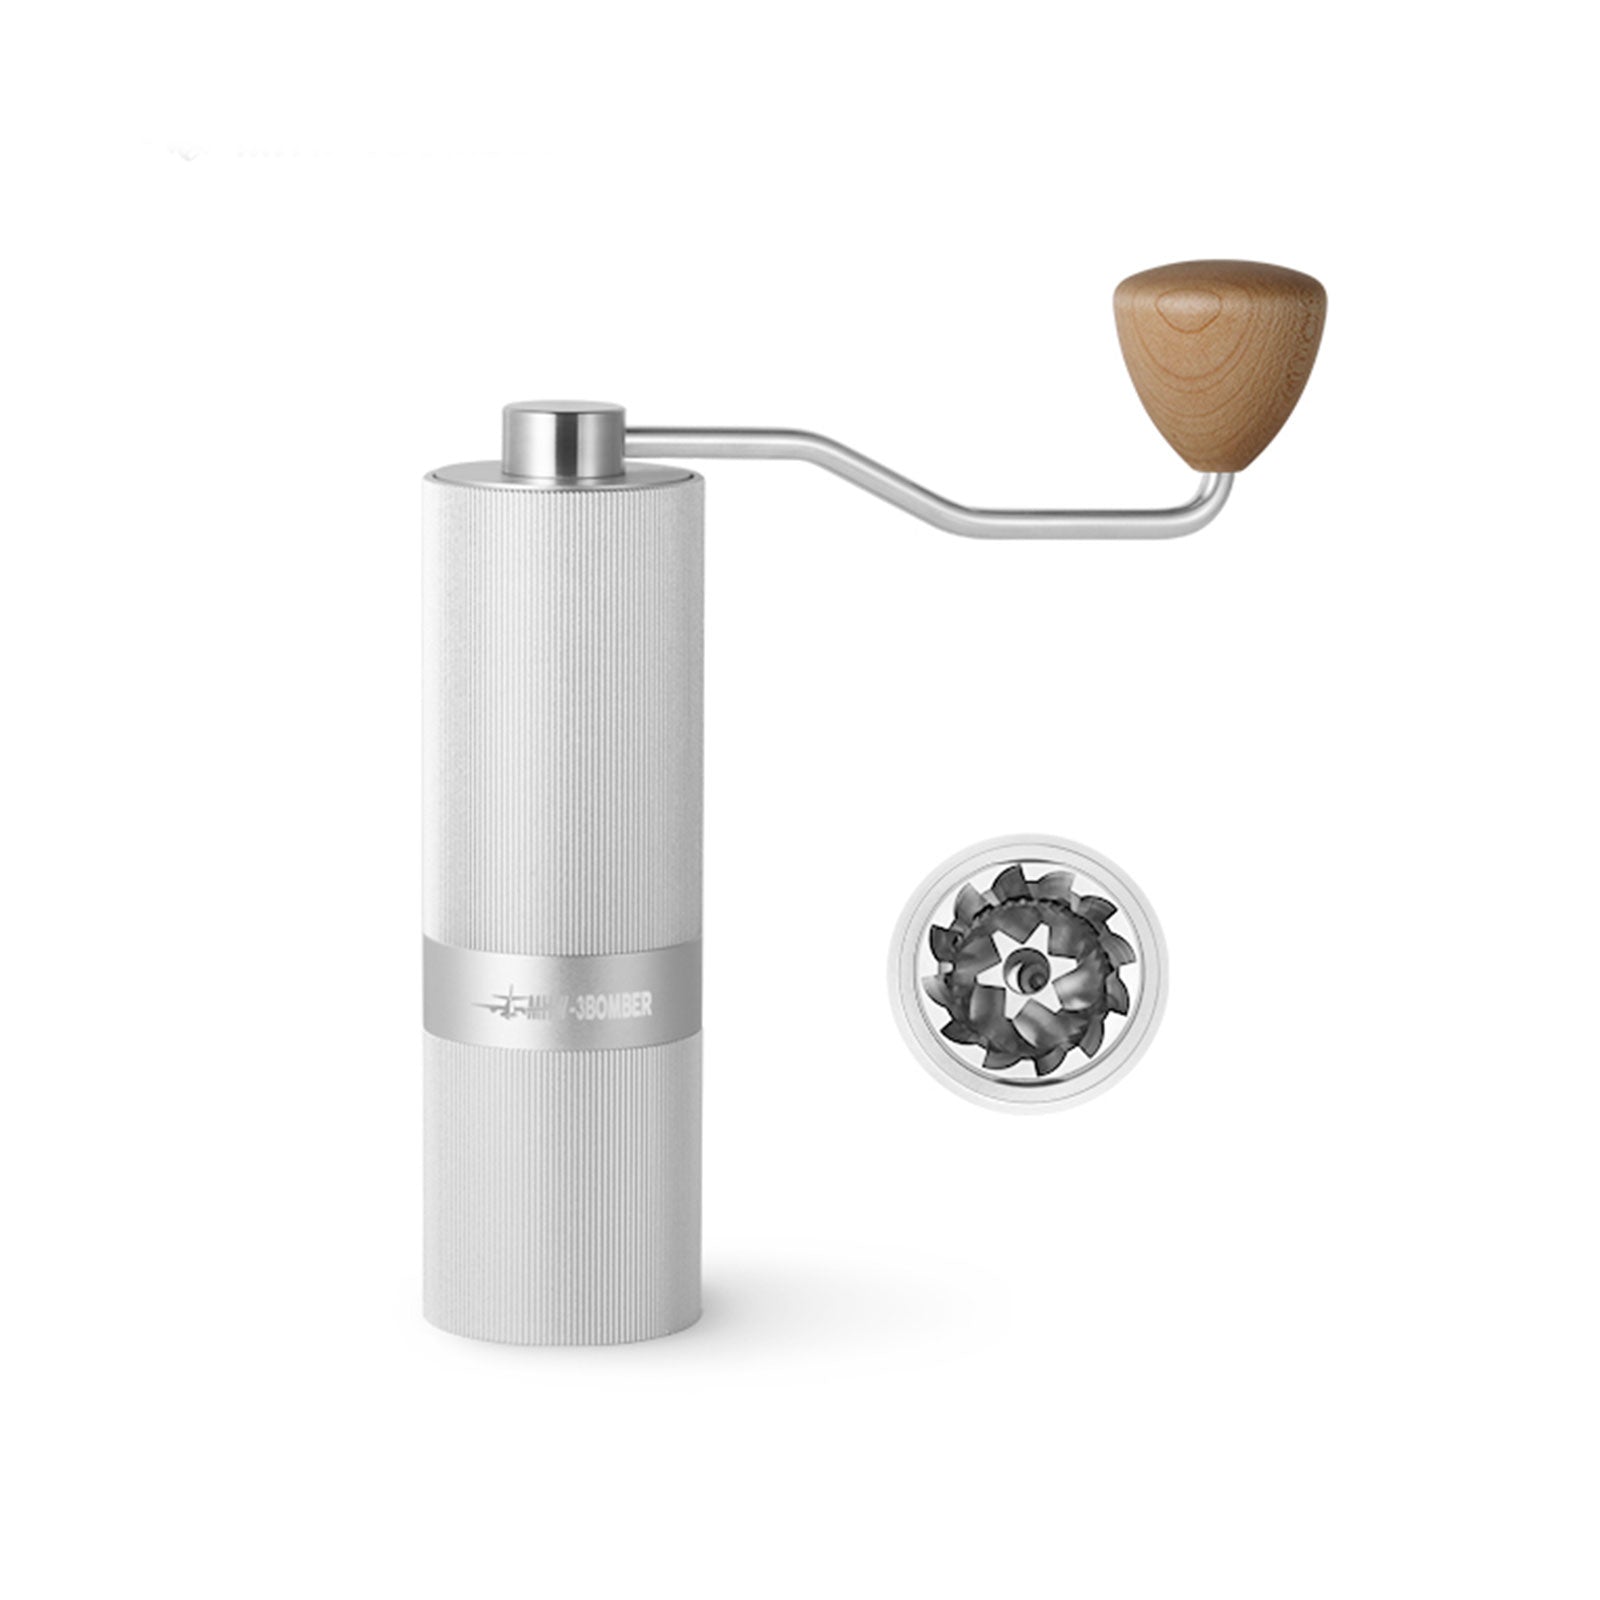 MHW-3BOMBER M1 Manual Coffee Grinder